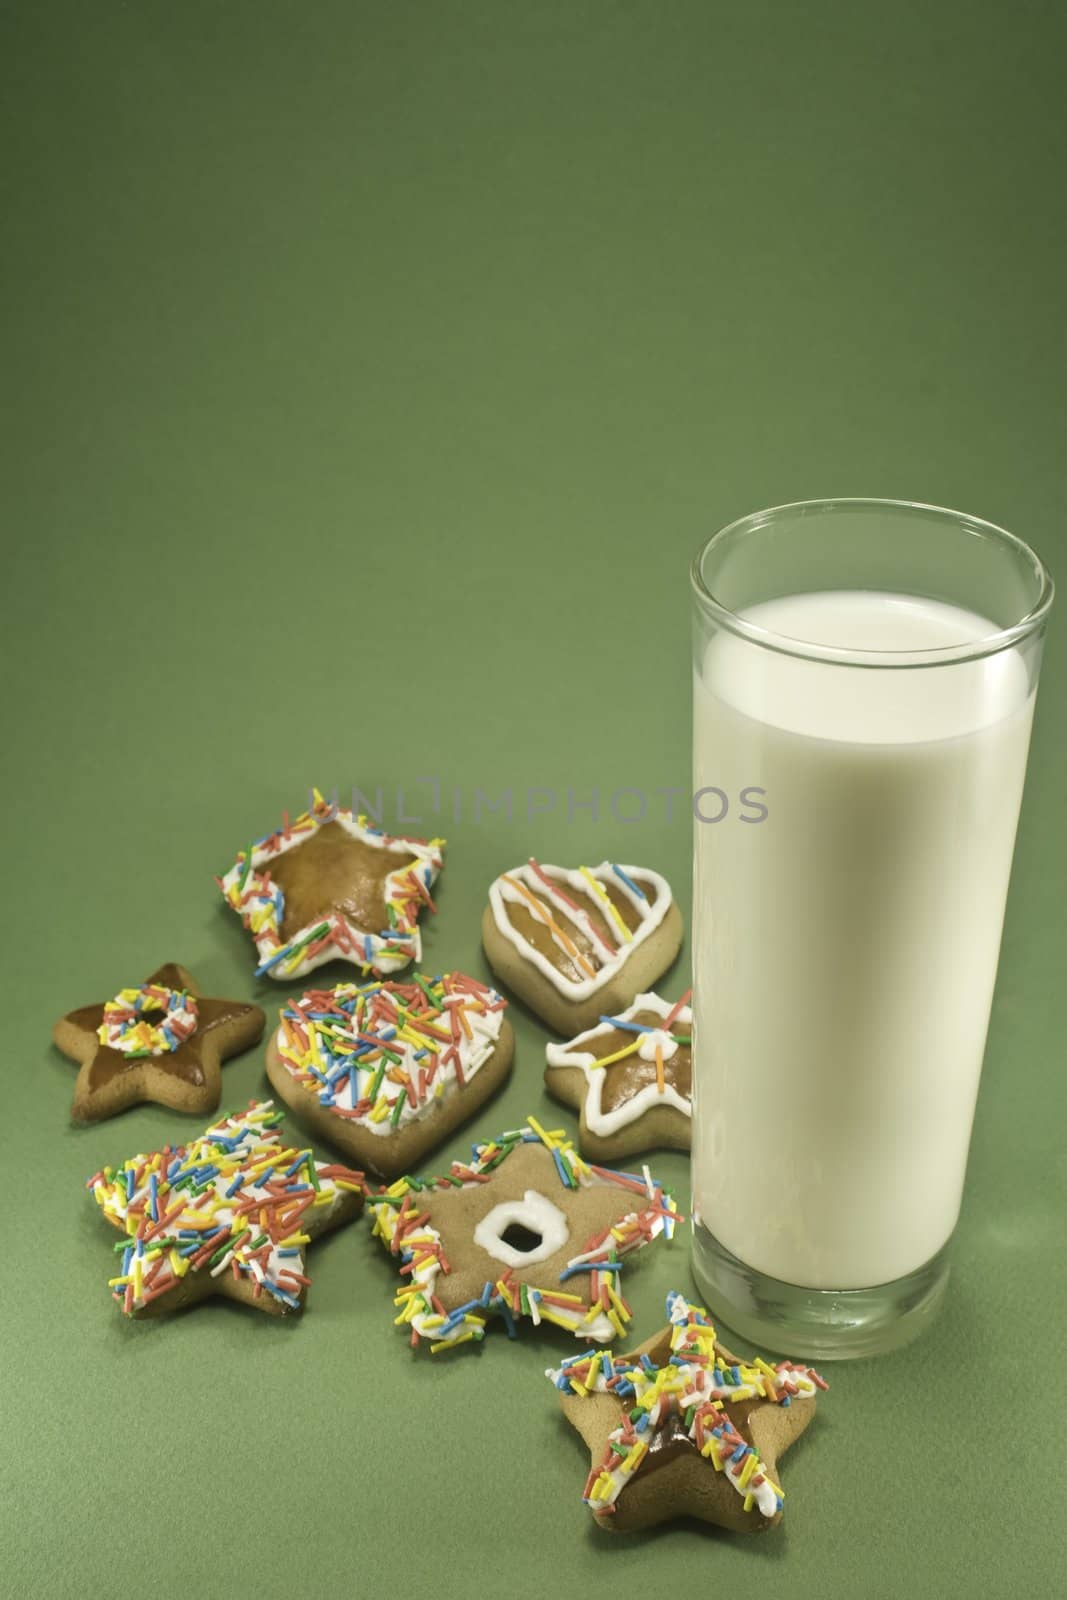 Cookies and milk by timscottrom